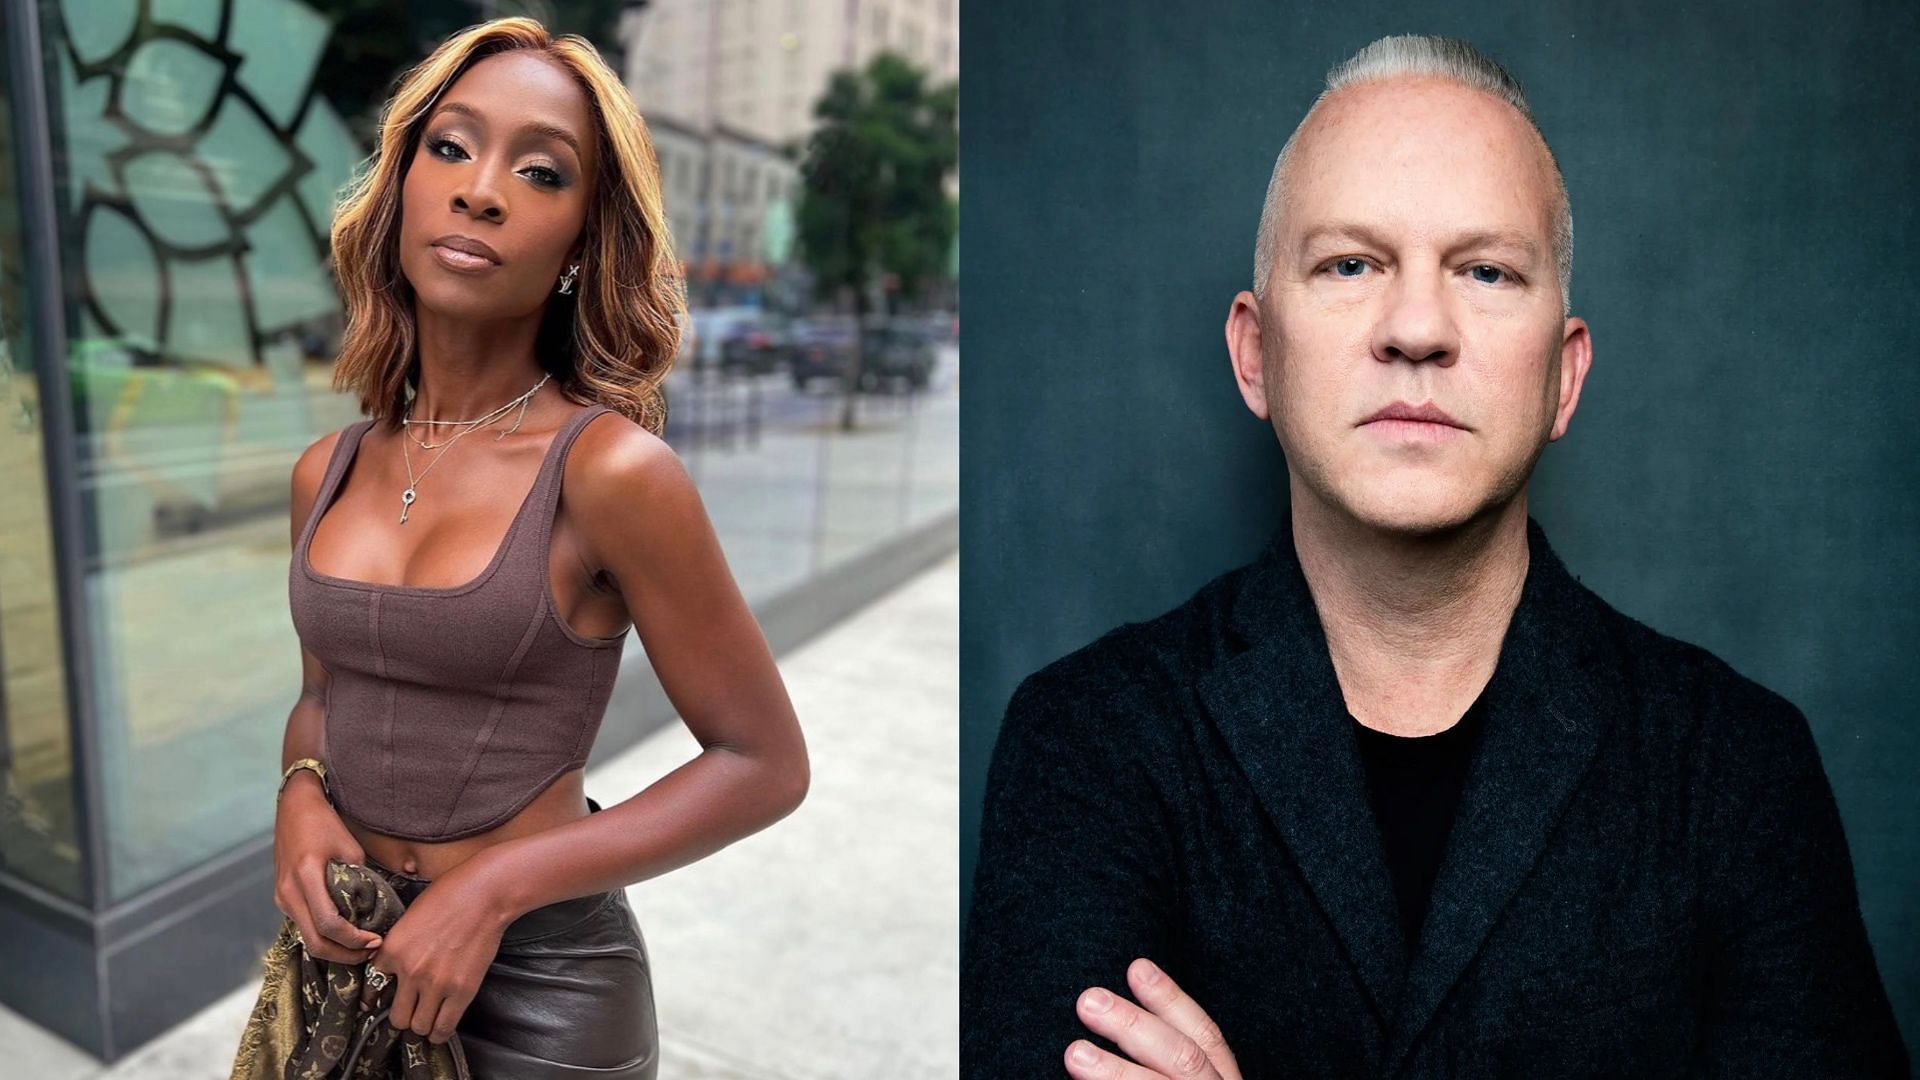 Thats unprofessional” Ryan Murphy roasted online after Angelica Ross claimed TV director ghosted her after offering an all-Black AHS season